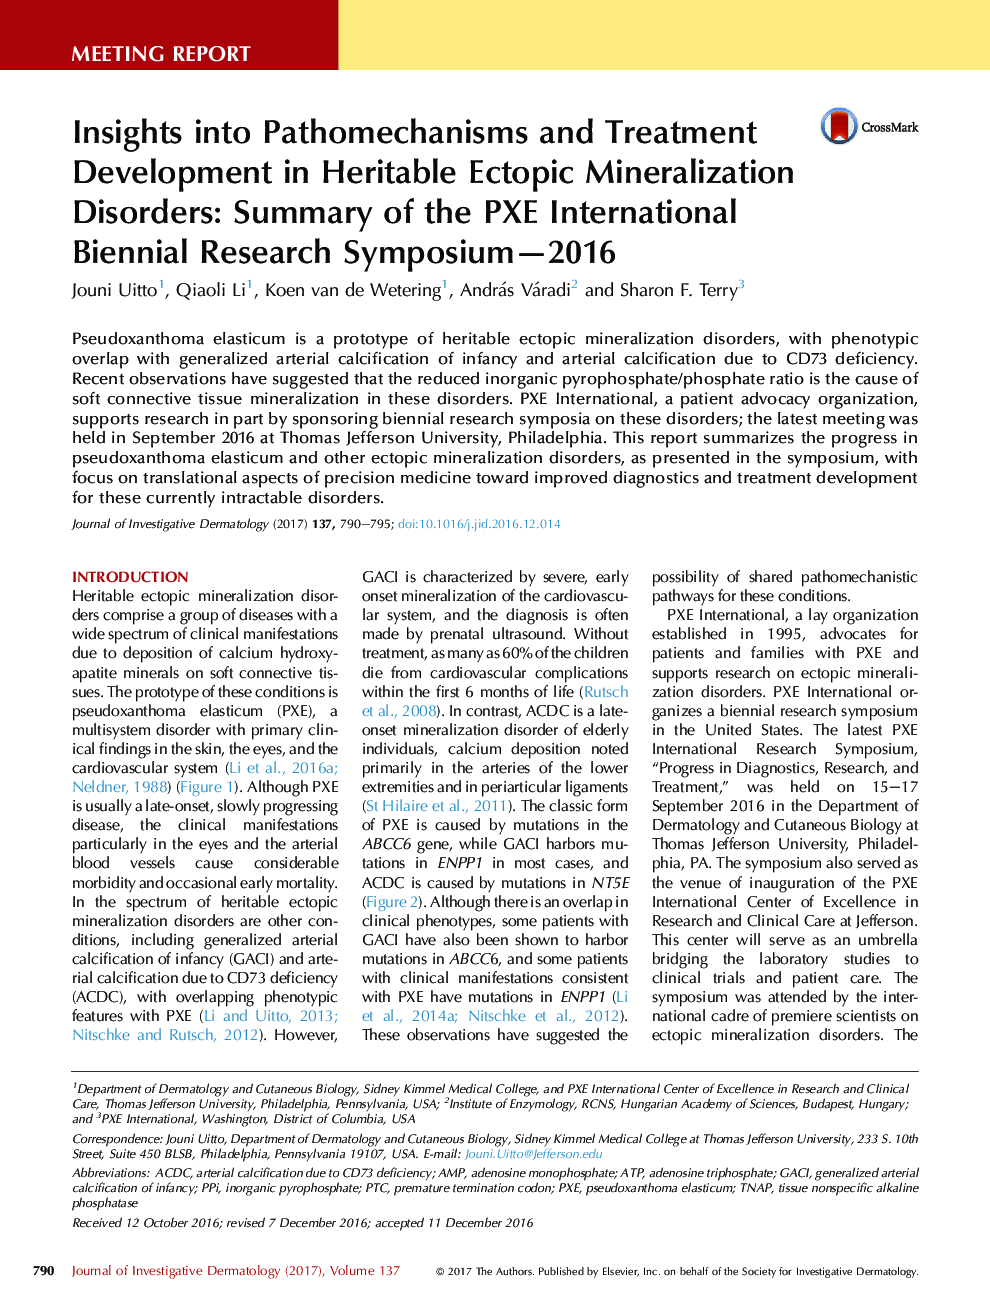 Insights into Pathomechanisms and Treatment Development in Heritable Ectopic Mineralization Disorders: Summary of the PXE International BiennialÂ Research Symposium-2016